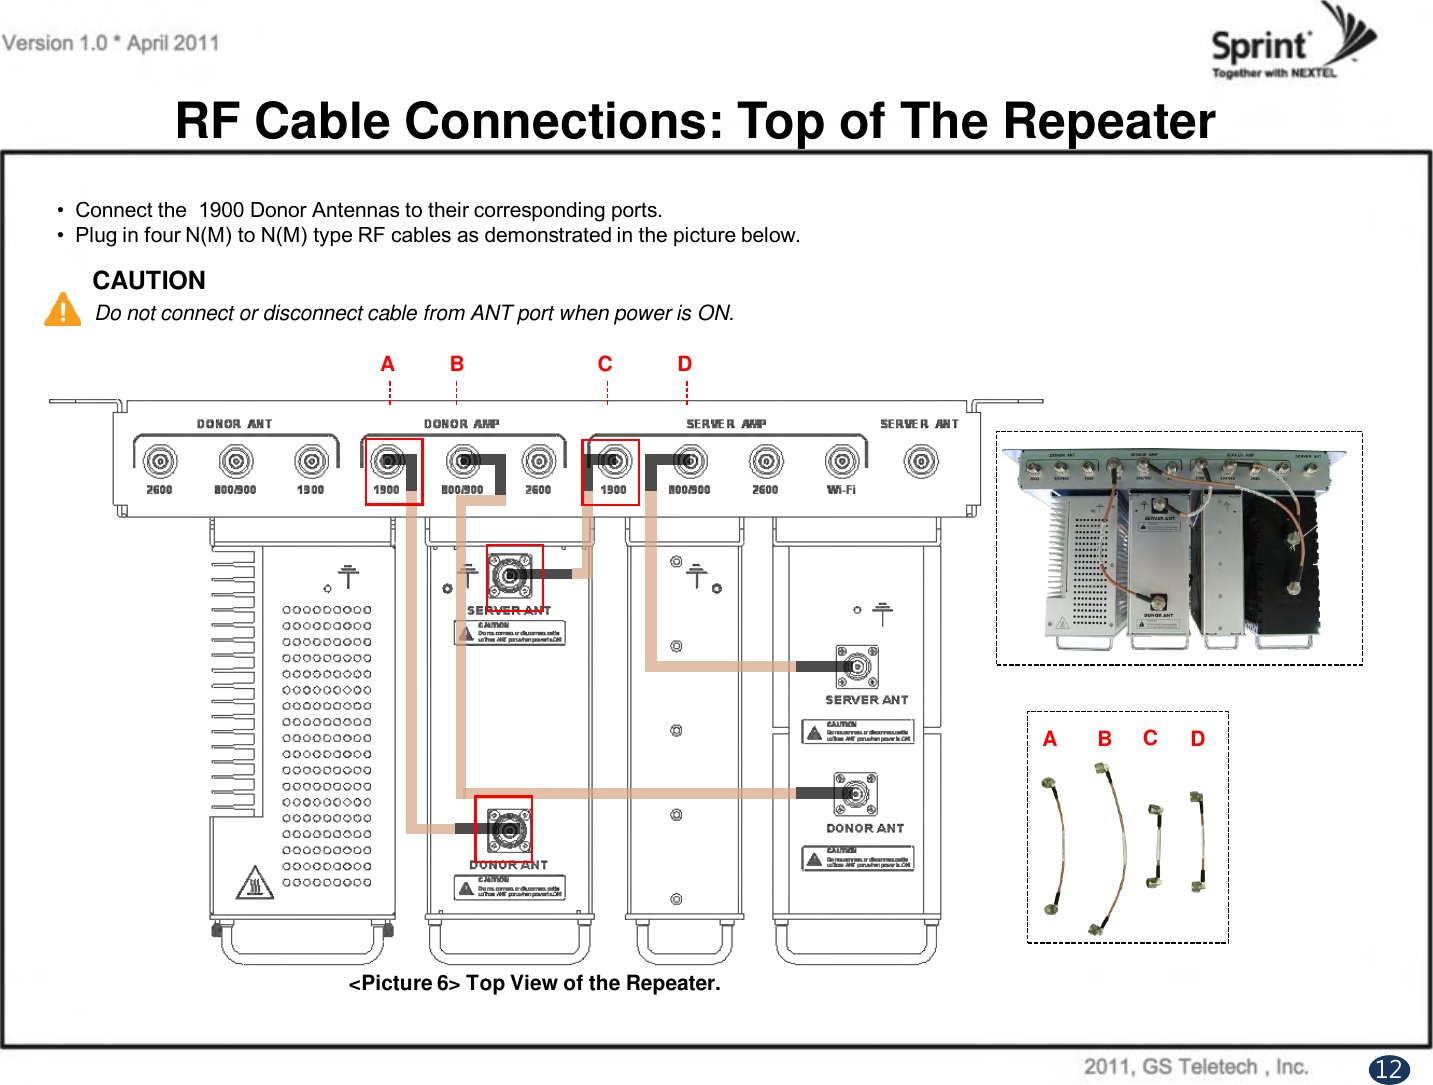 RF Cable Connections: Top of The RepeaterCAUTIONDo not connect or disconnect cable from ANT port when power is ON.•  Connect the  1900 Donor Antennas to their corresponding ports.•  Plug in four N(M) to N(M) type RF cables as demonstrated in the picture below.A B C DA B CD&lt;Picture 6&gt; Top View of the Repeater.12